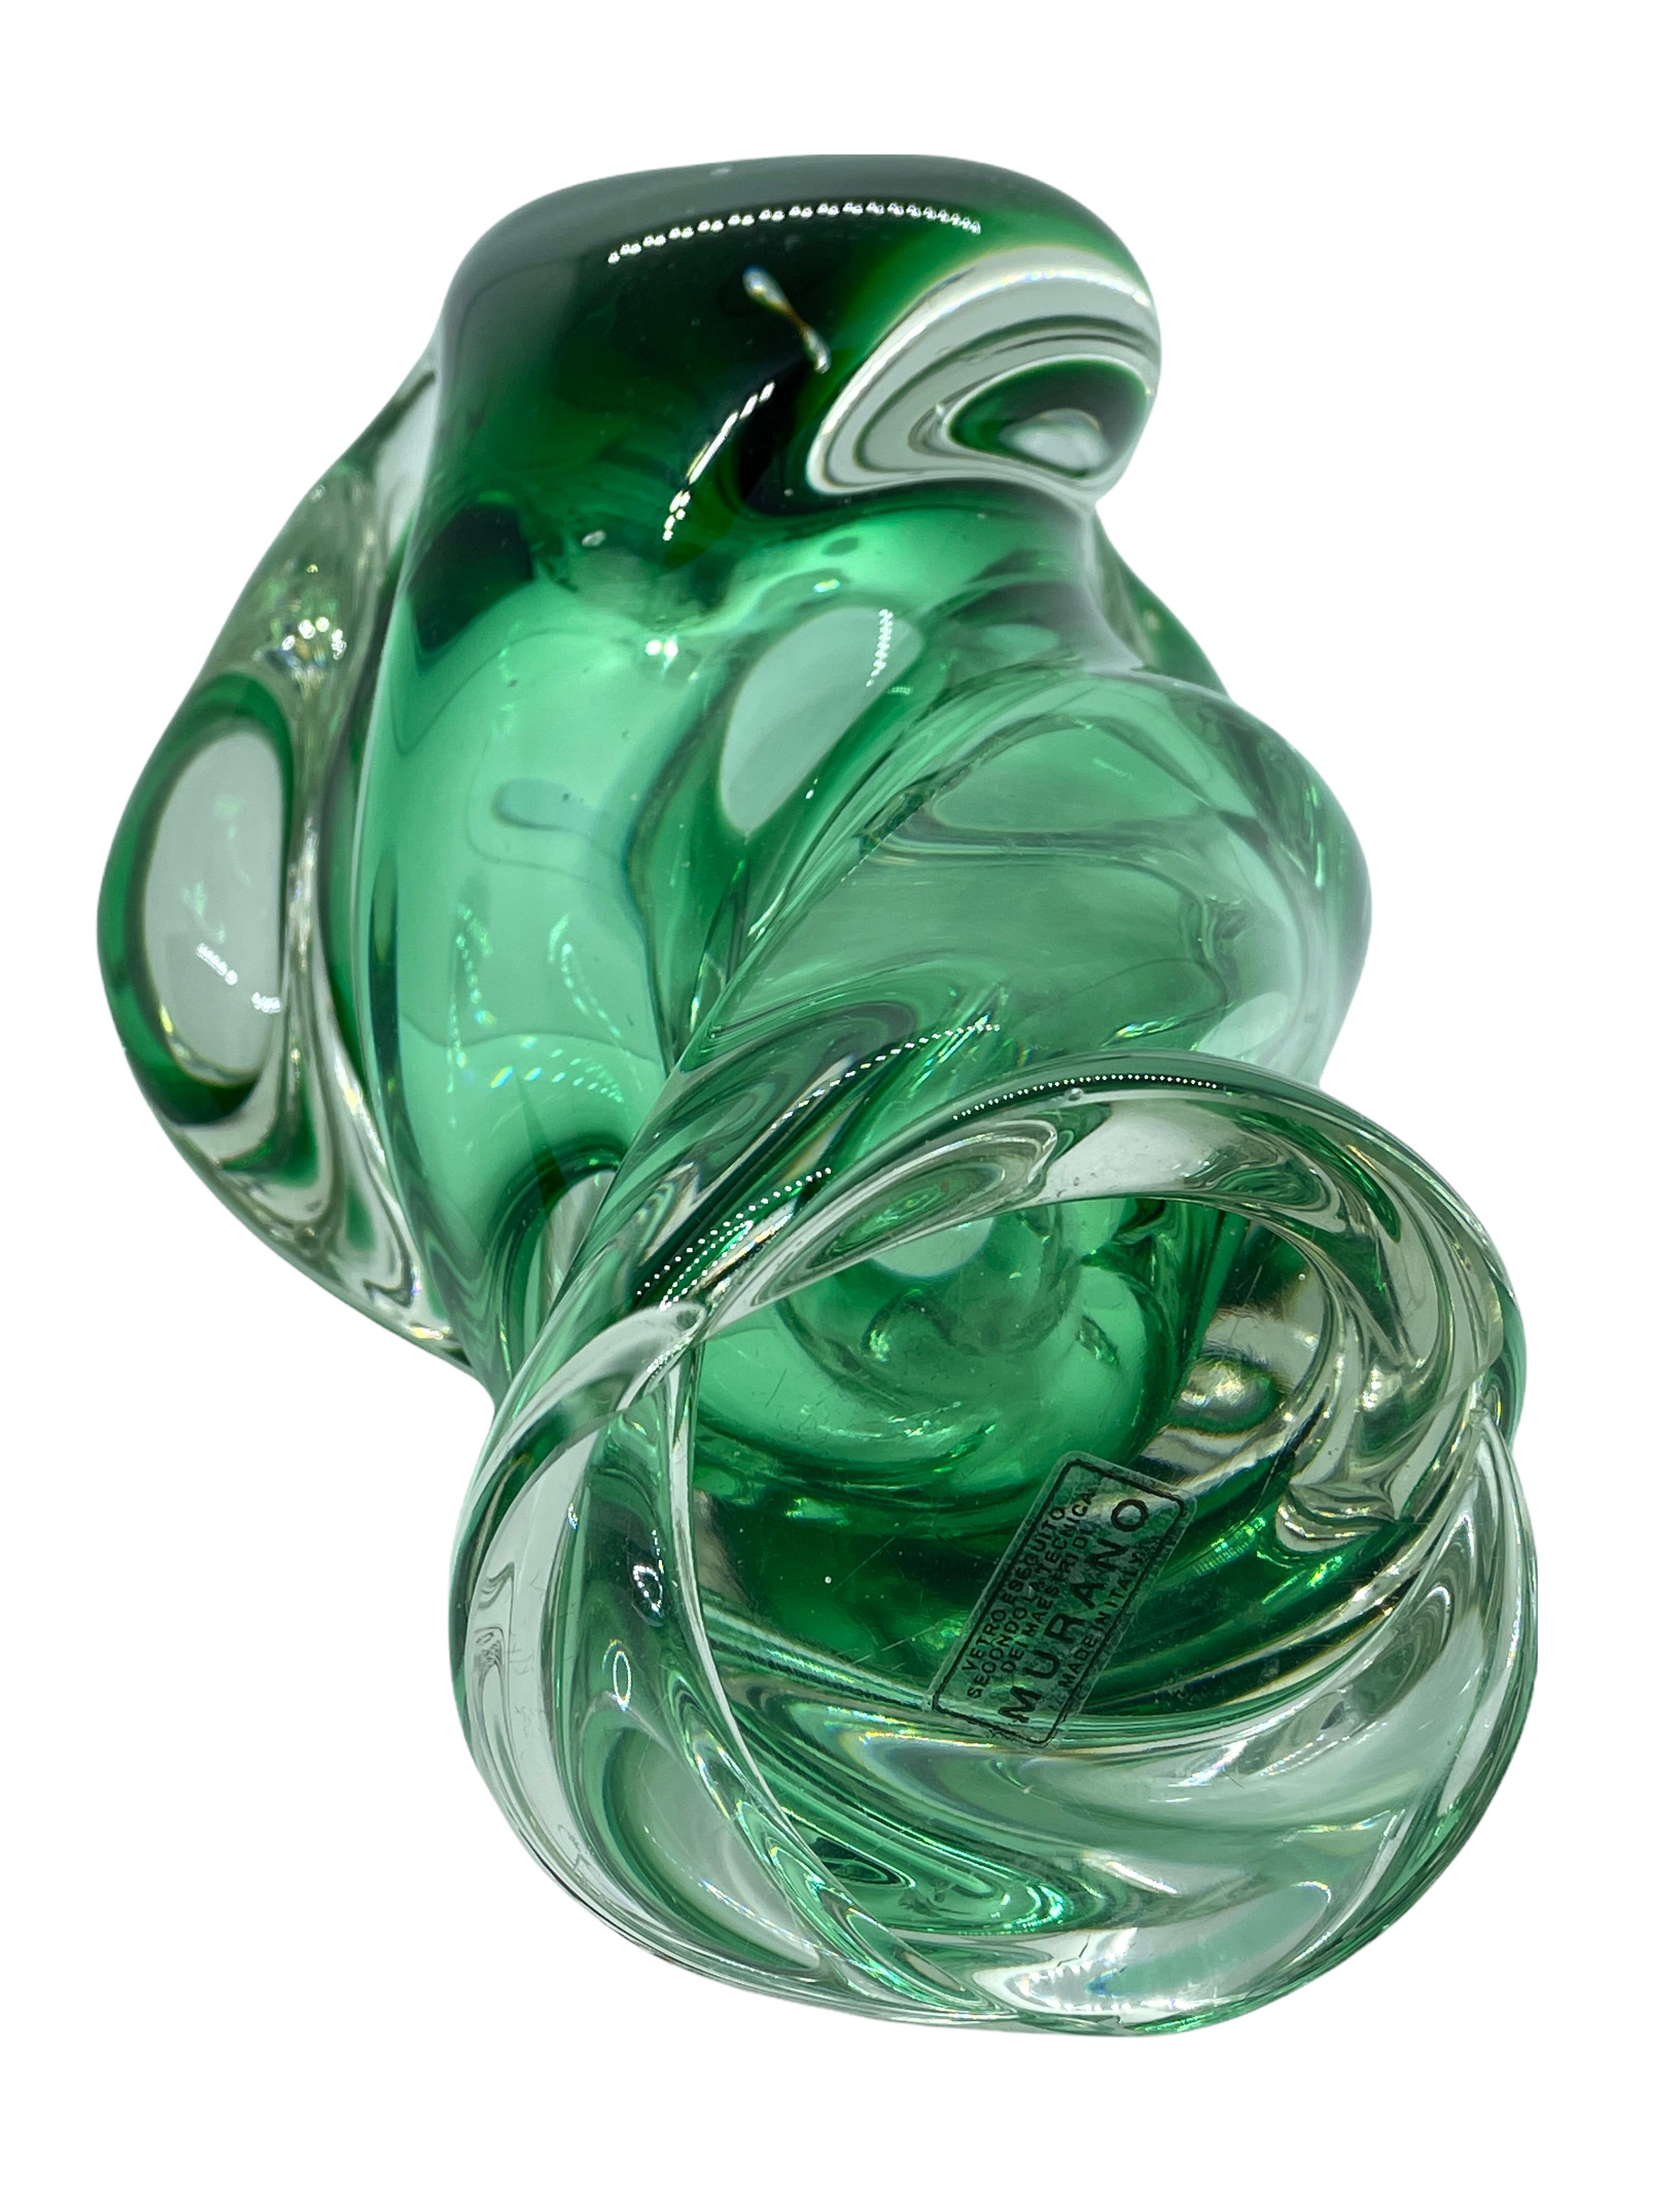 Late 20th Century Green and Clear Sommerso Art Glass Vase Object Sculpture Murano, Italy, 1980s